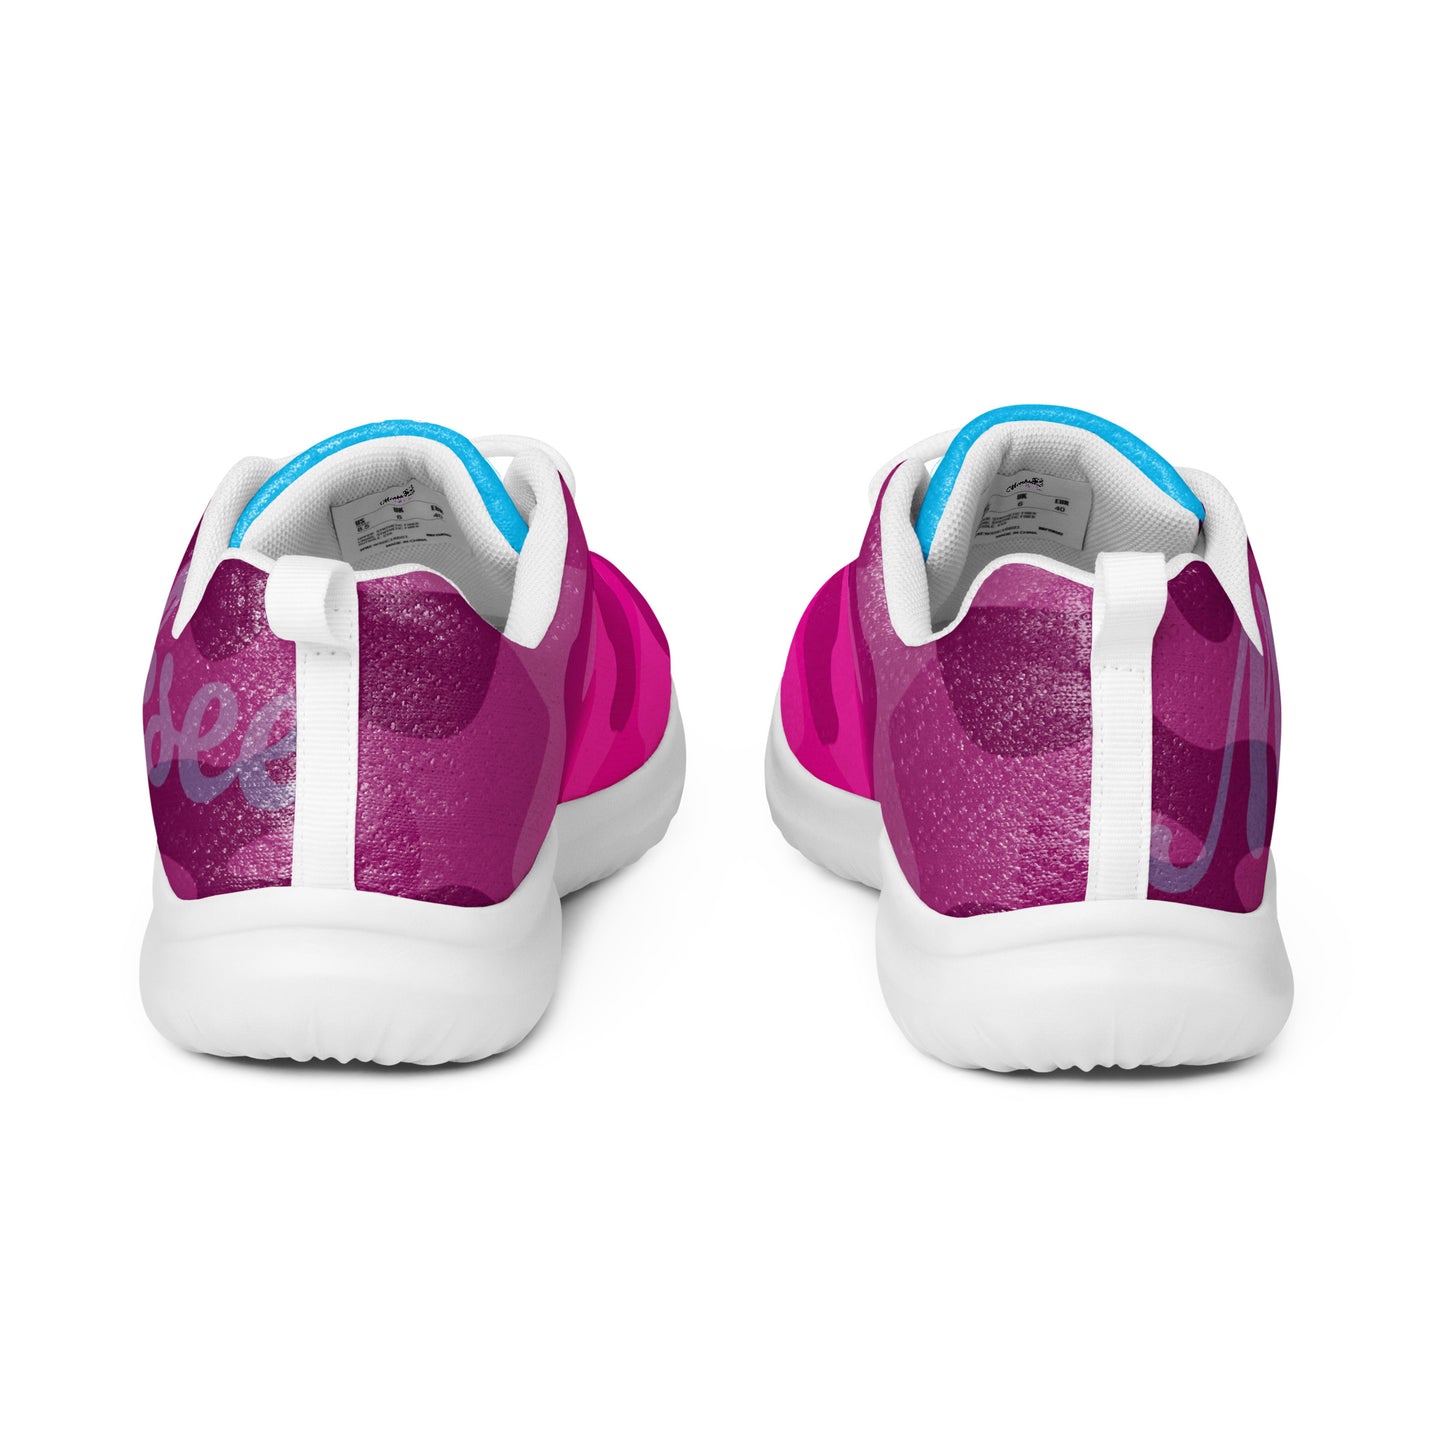 Move Girl - Womens trainers